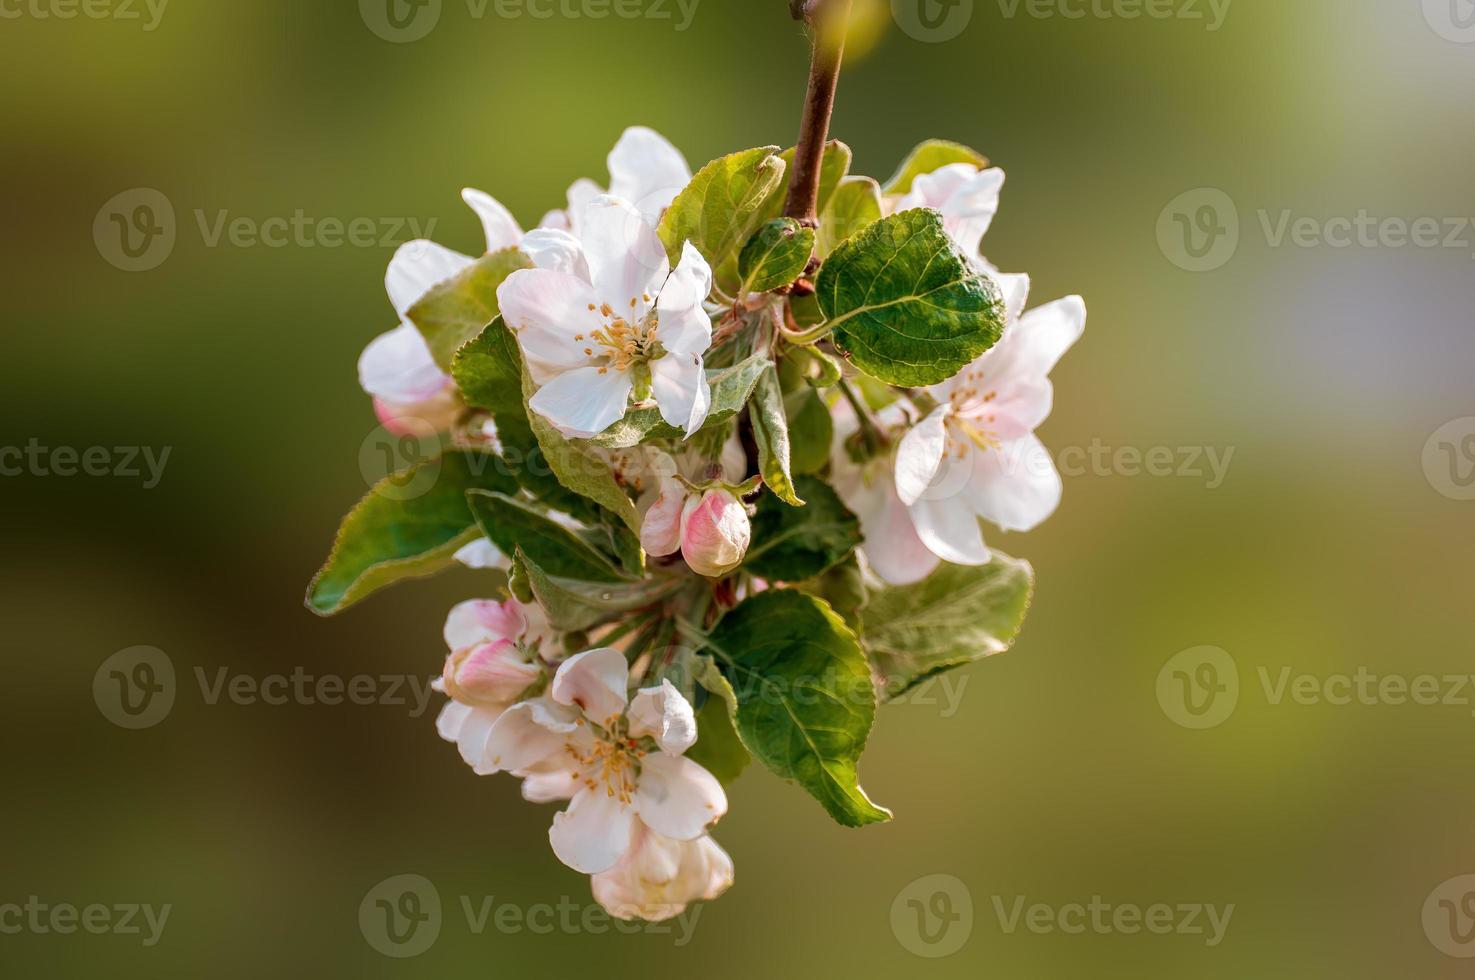 a branch with apple blossoms photo